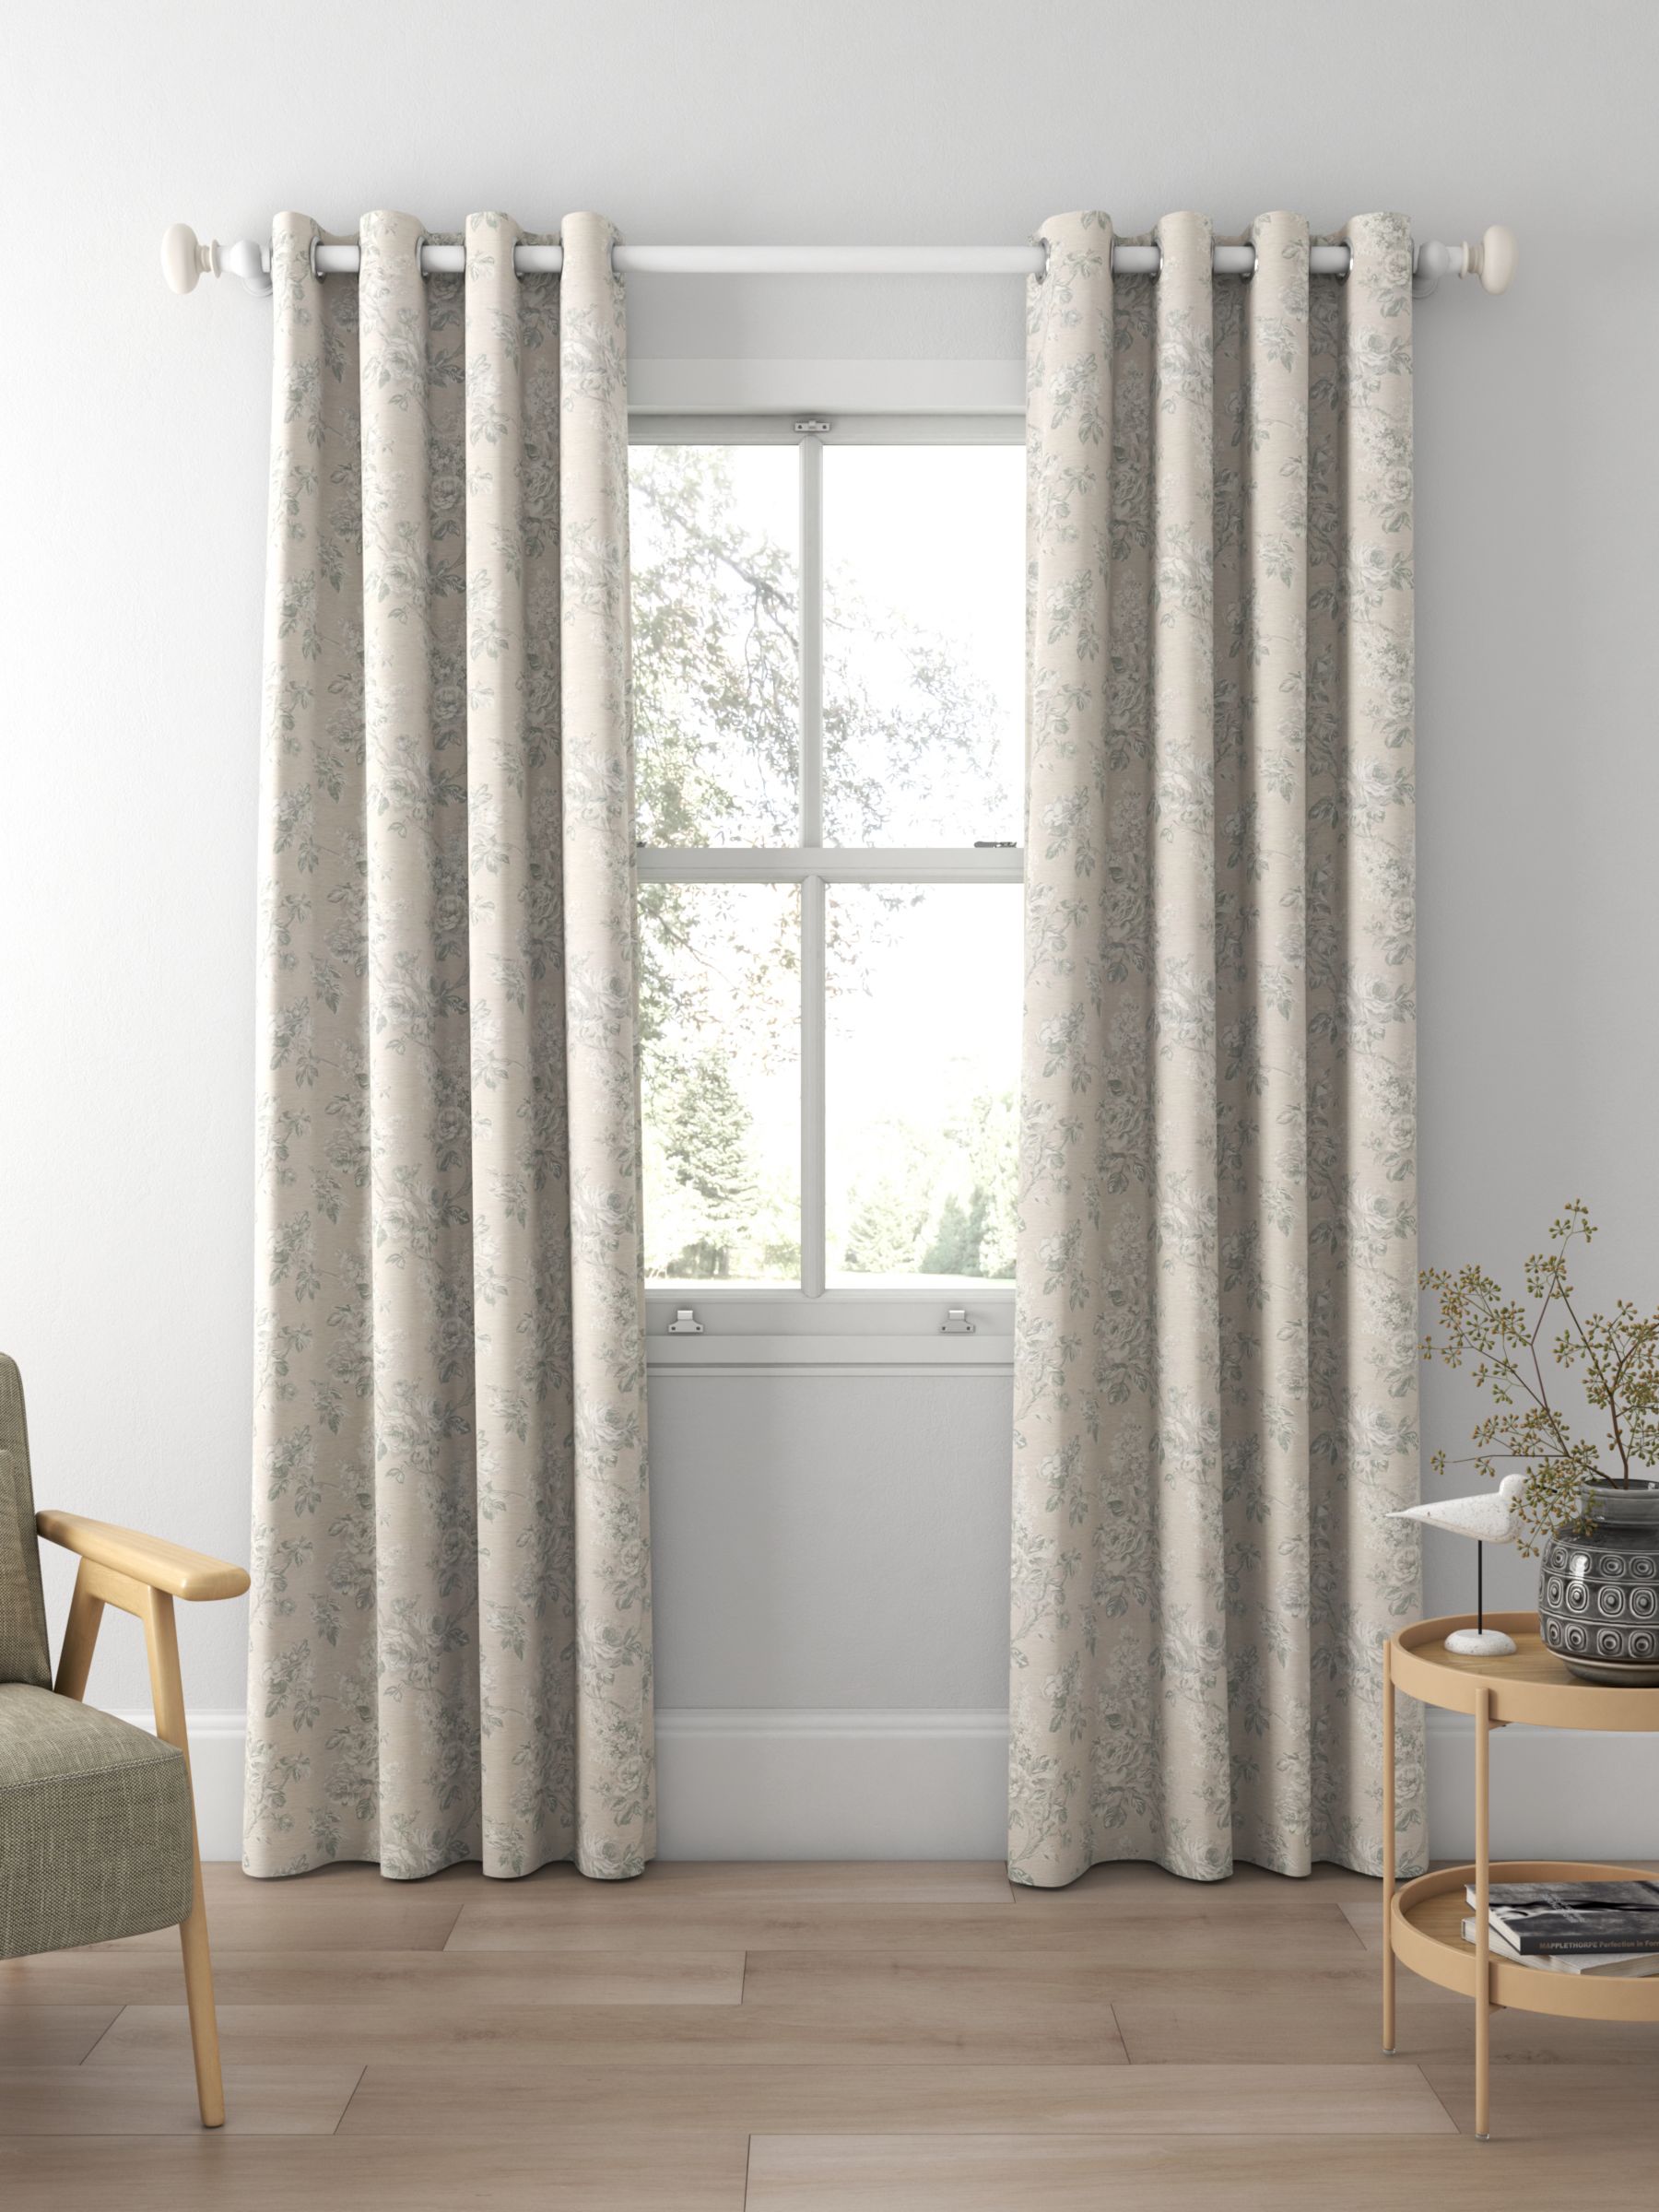 Sanderson Sorilla Damask Made to Measure Curtains, Eggshell/Linen